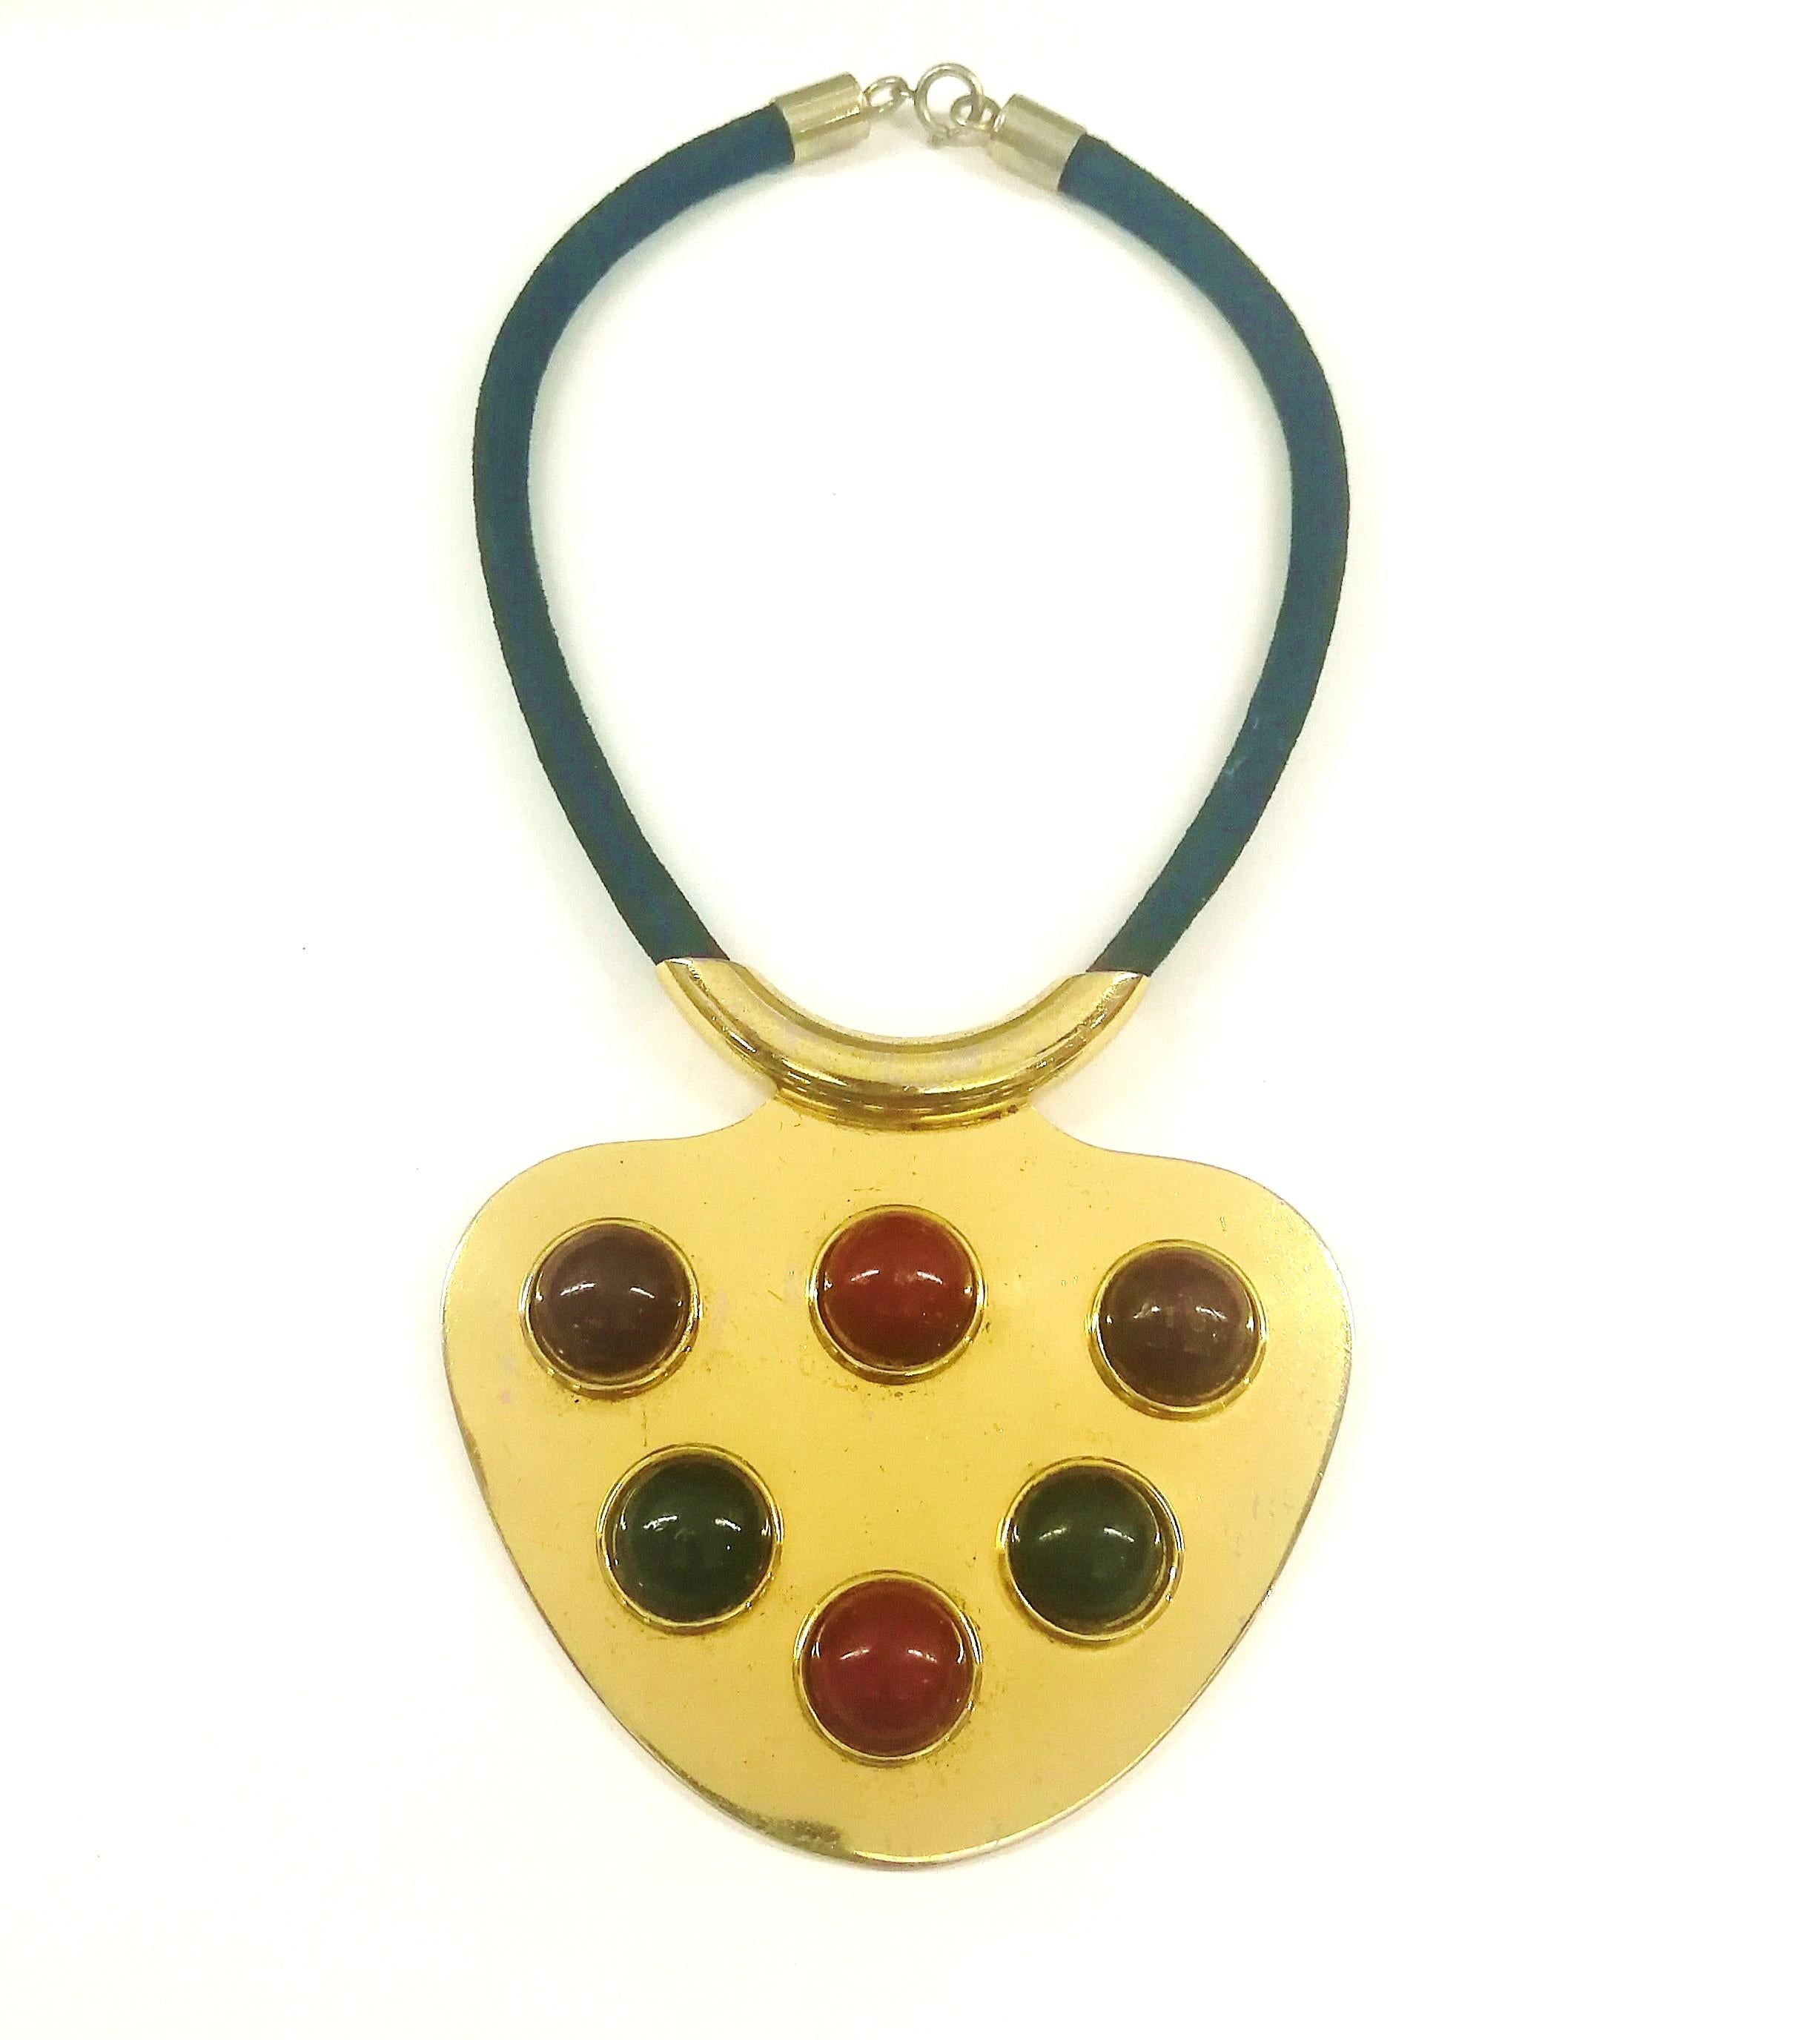 A striking gilded metal and coloured Bakelite cabuchon pendant by Lanvin from 1970. At a time when fashion was pushing ahead into Space Age designs and ways of living, Lanvin too were at the forefront of presenting highly futuristic, abstract